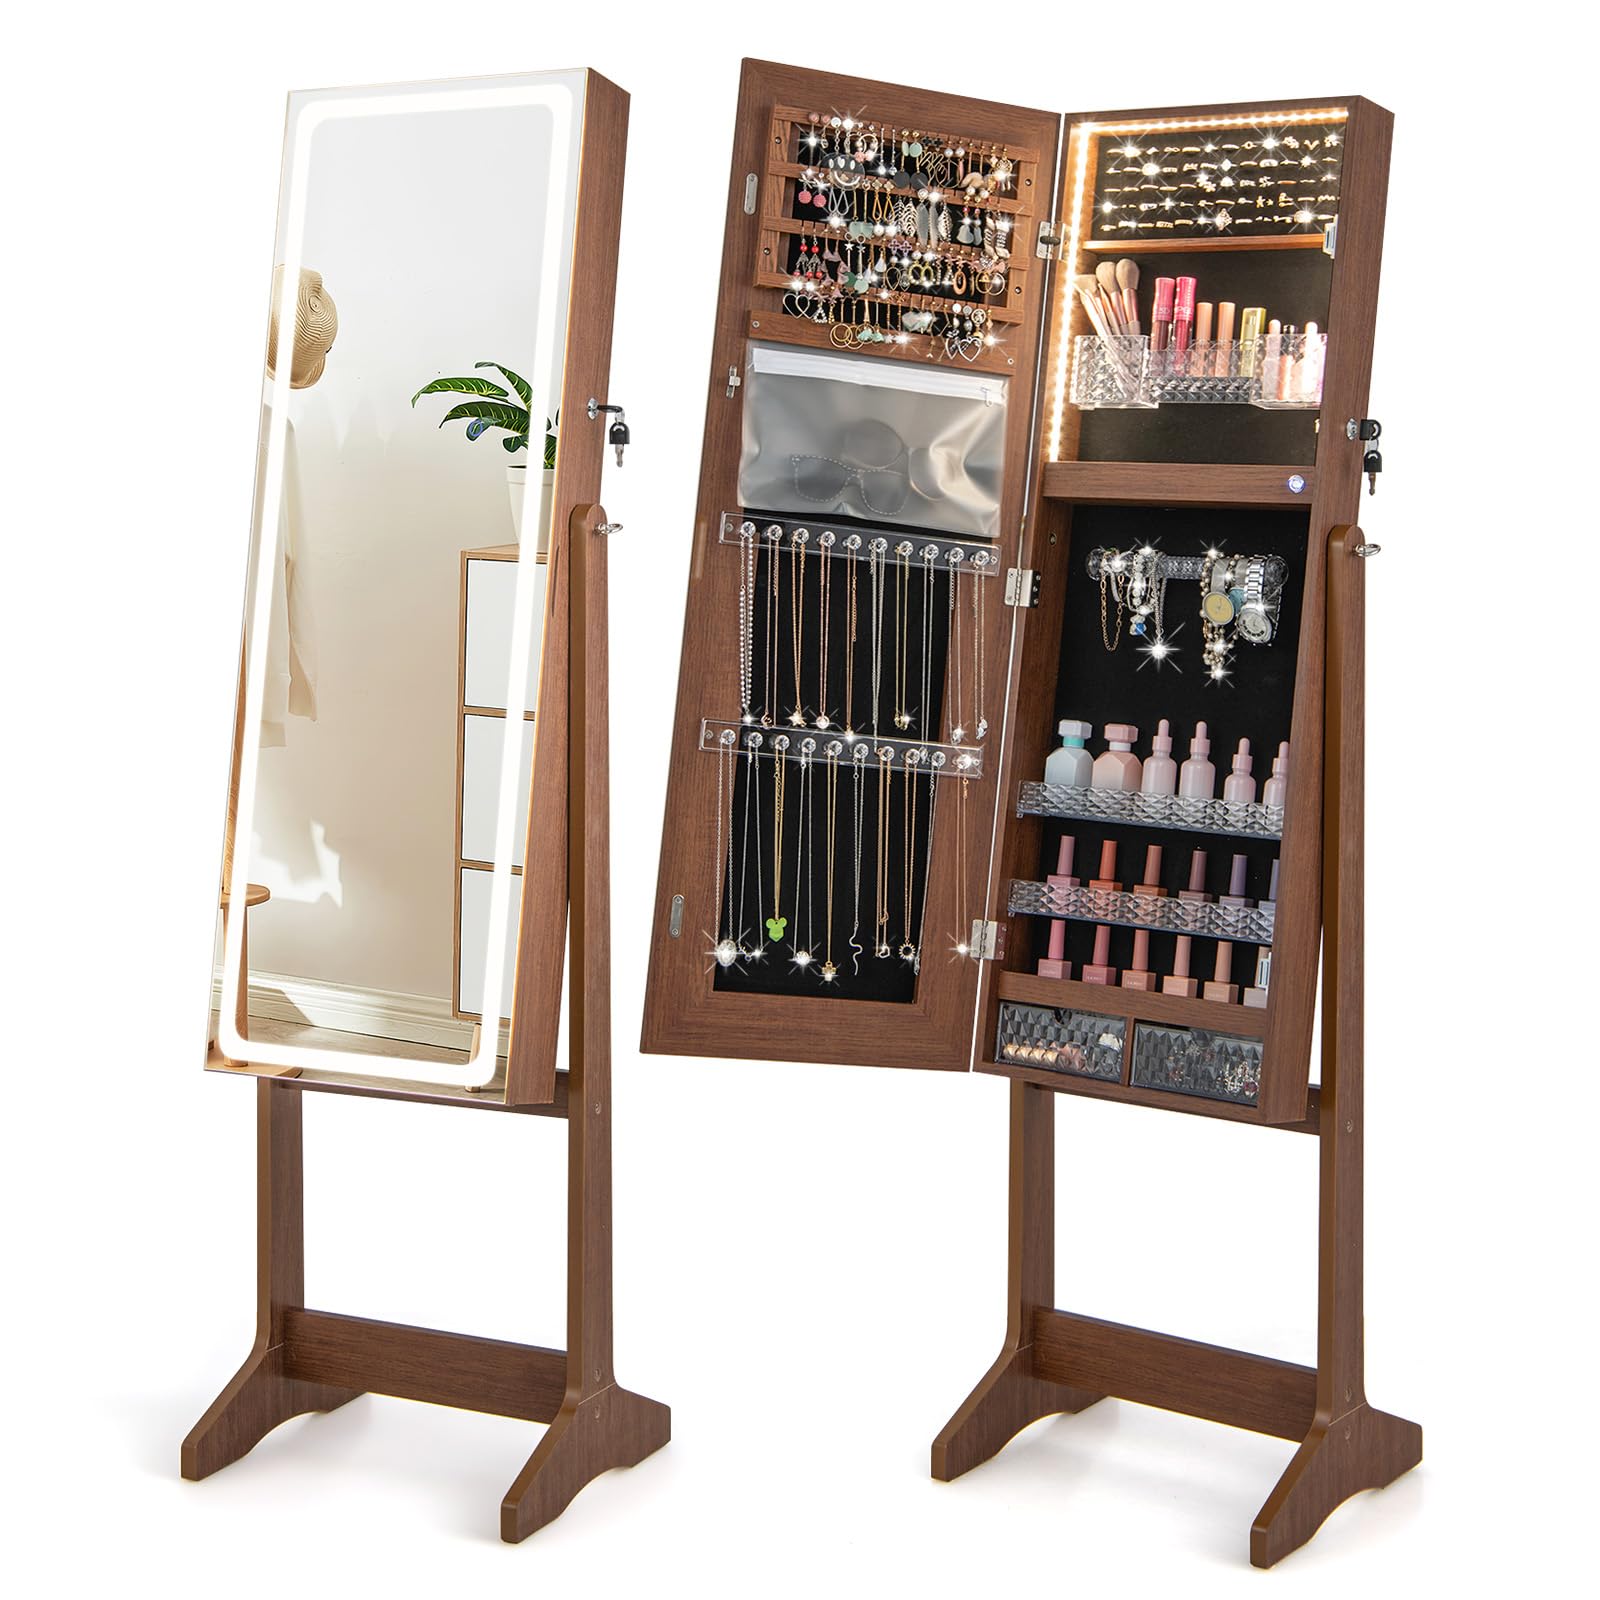 CHARMAID LED Mirror Jewelry Cabinet - Lockable Jewelry Armoire